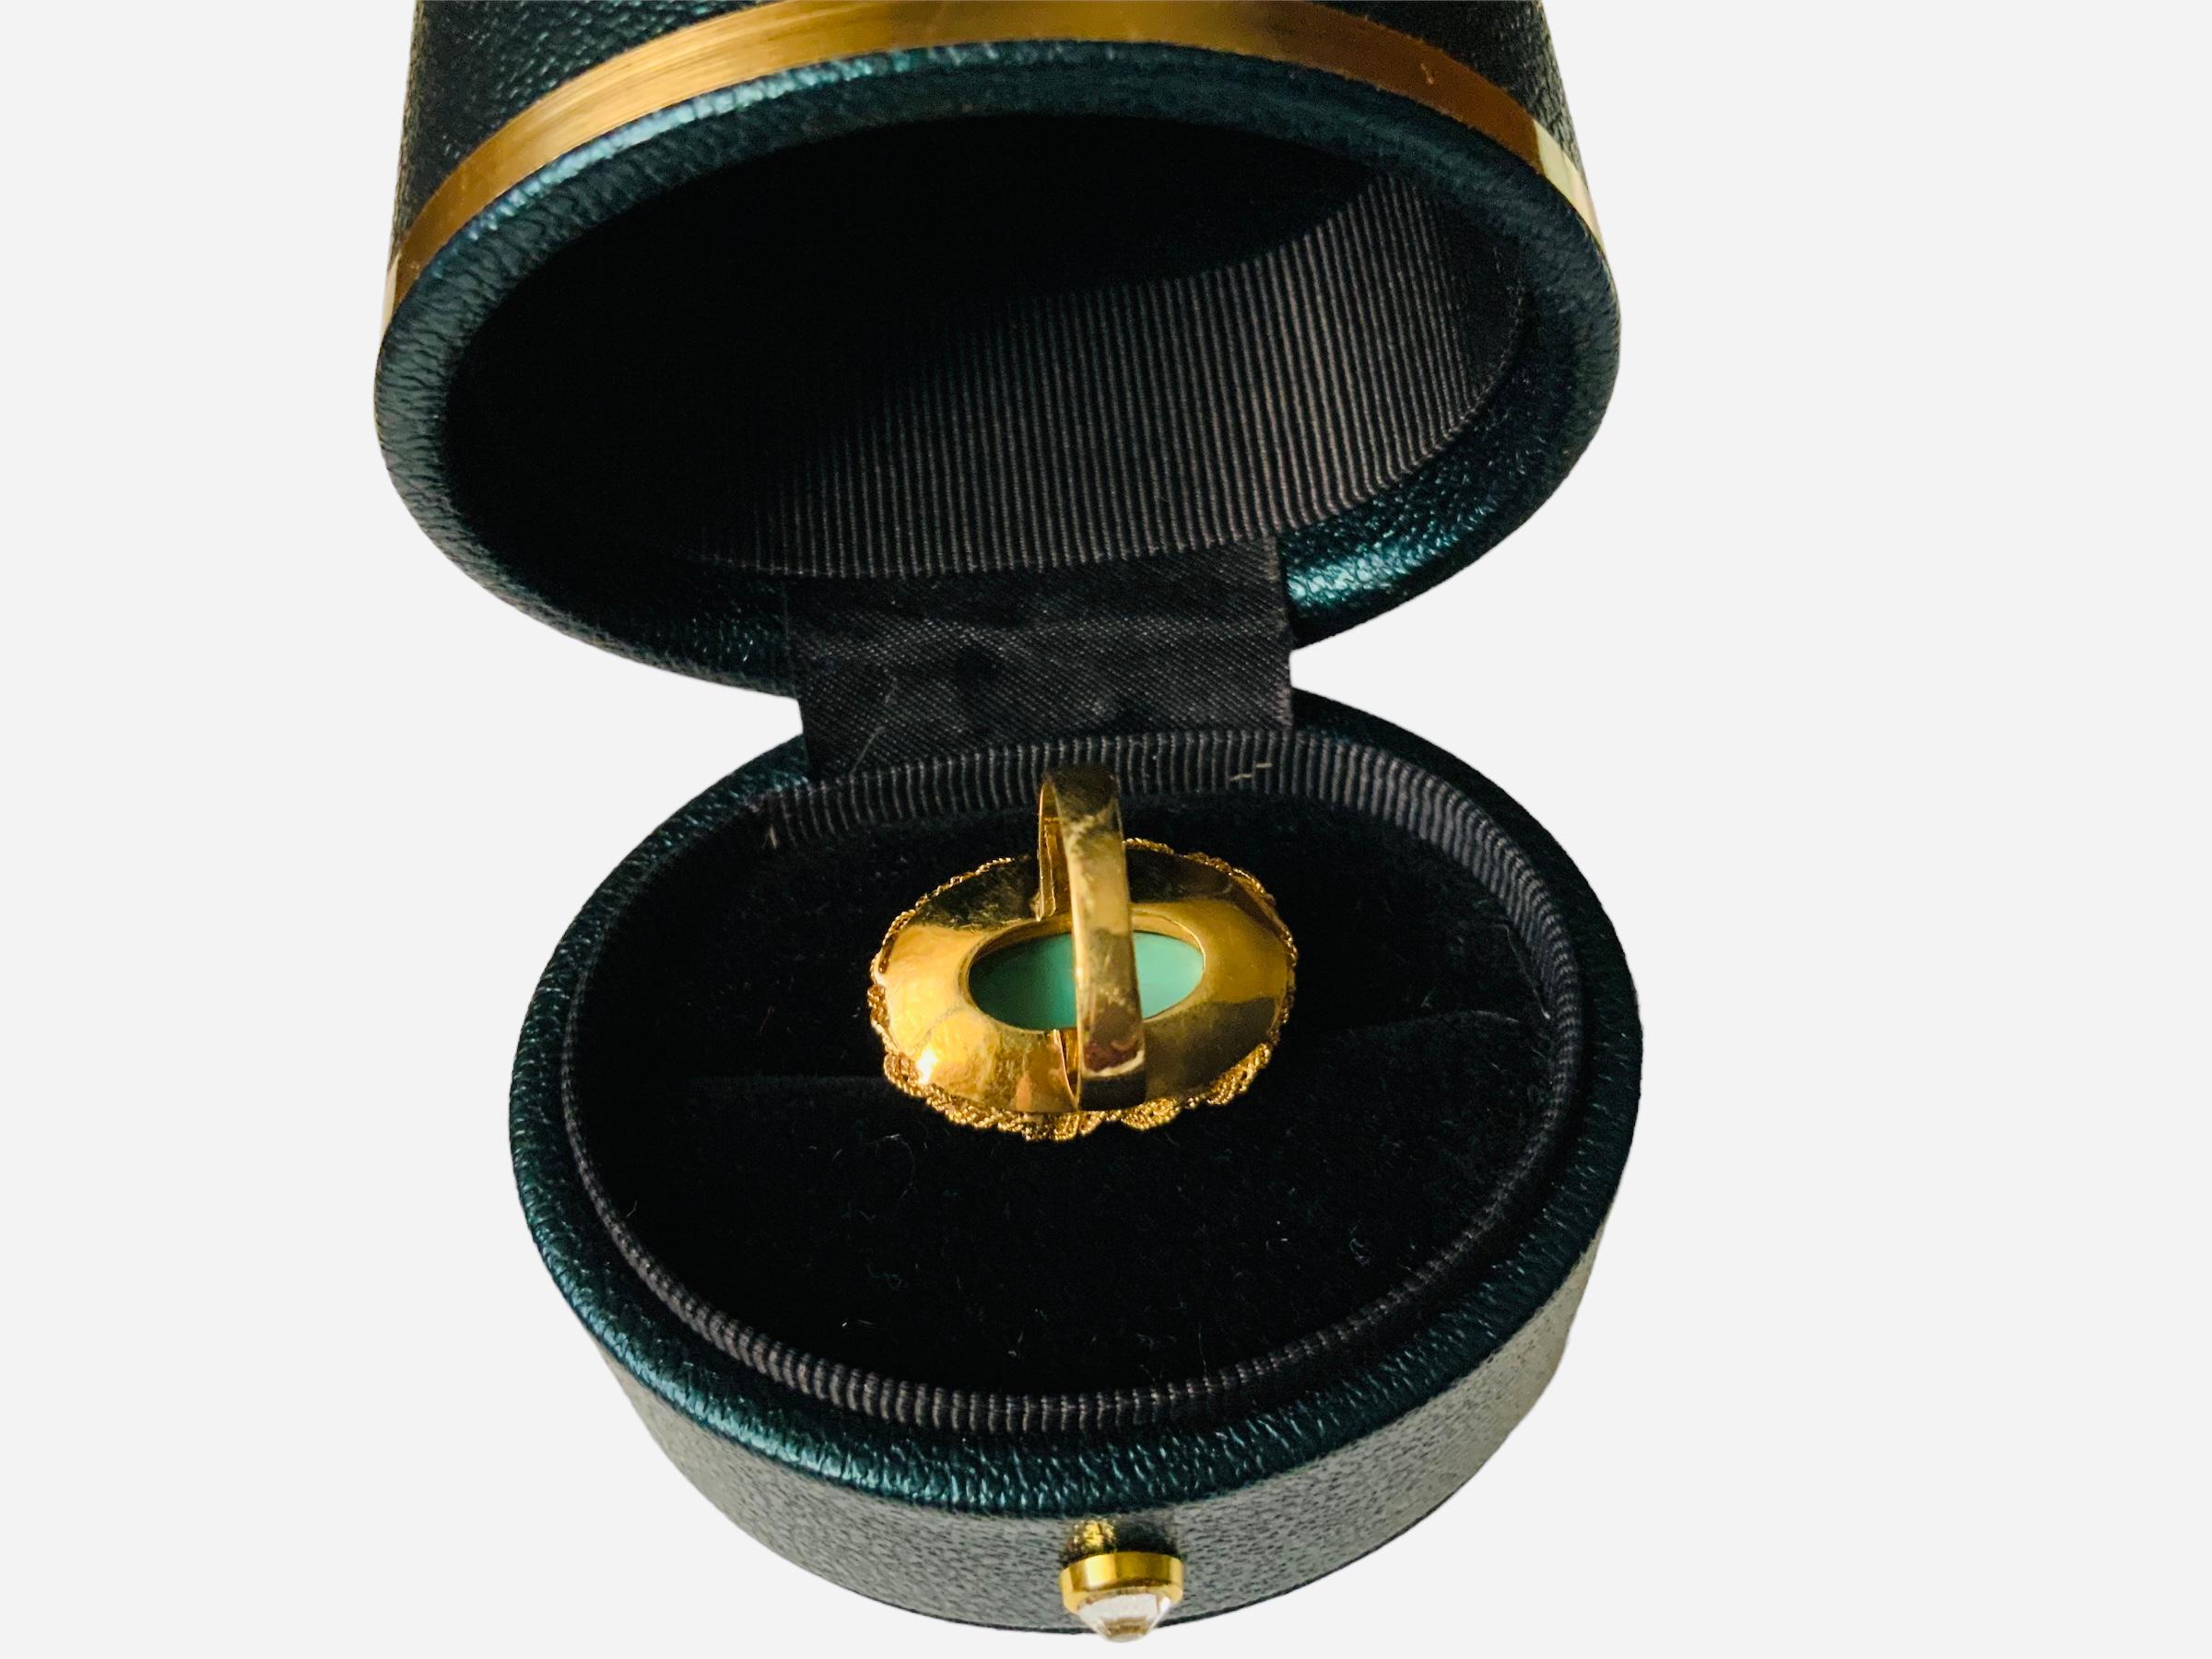 Women's Italian 18K Yellow Gold Turquoise Cocktail Ring For Sale